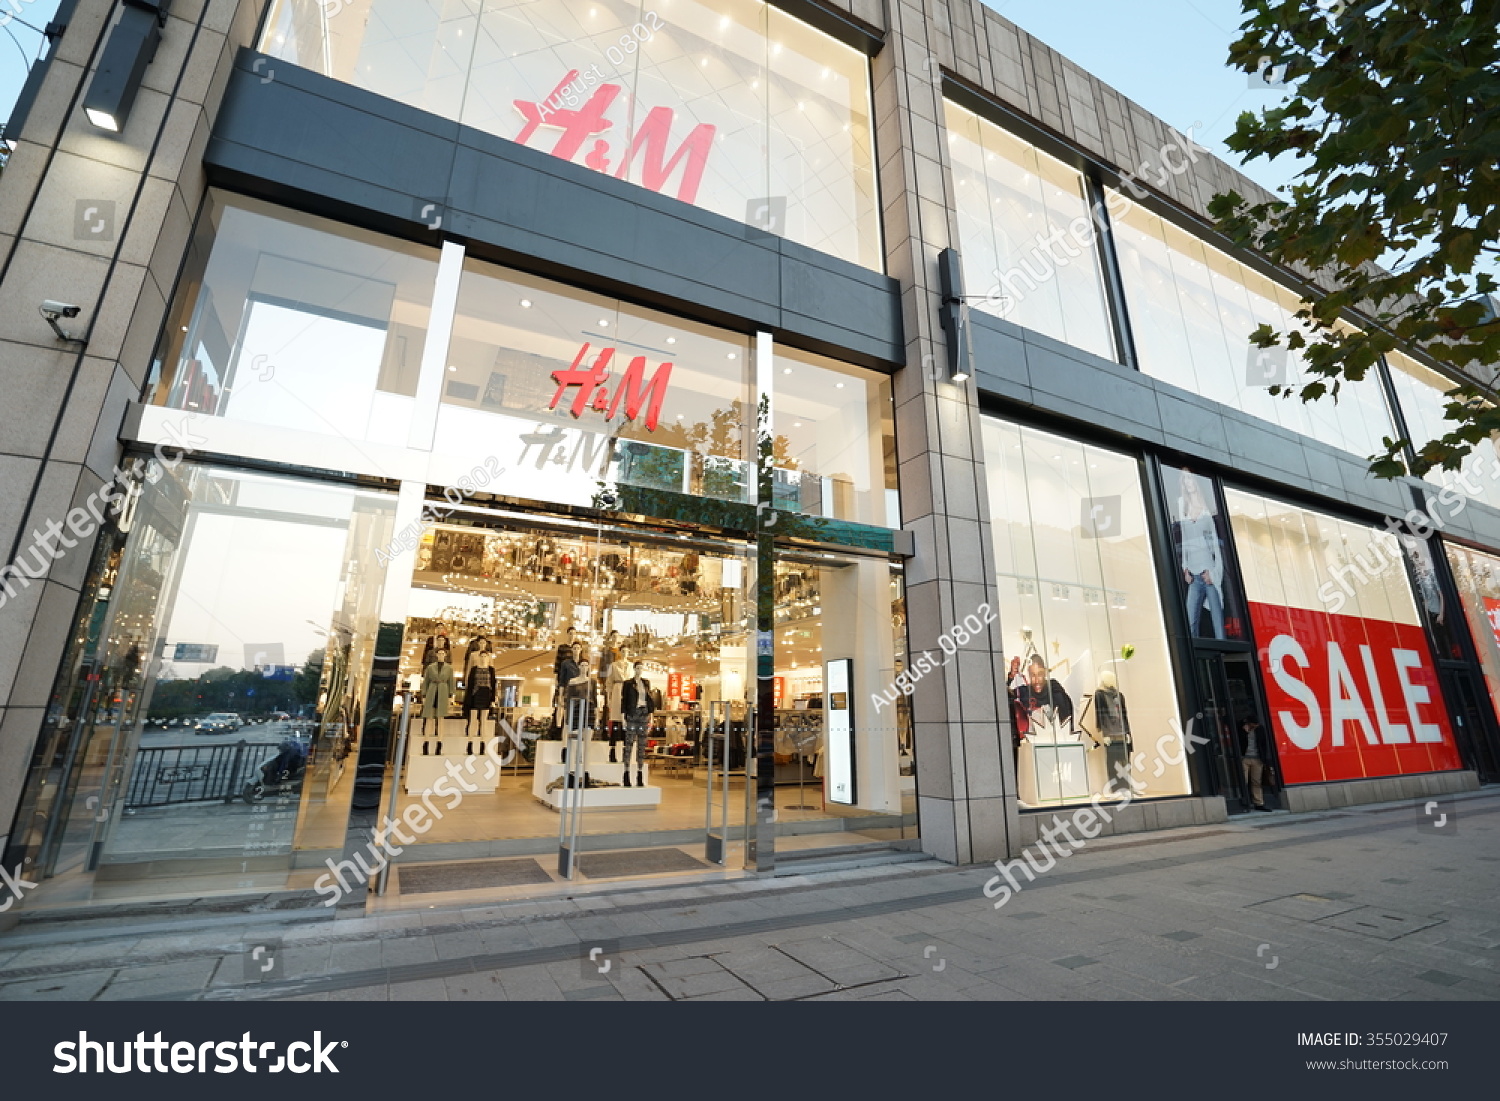 Shanghai-China - Dec. 16,2015: Before Christmas, Hm Fashion Store In ...